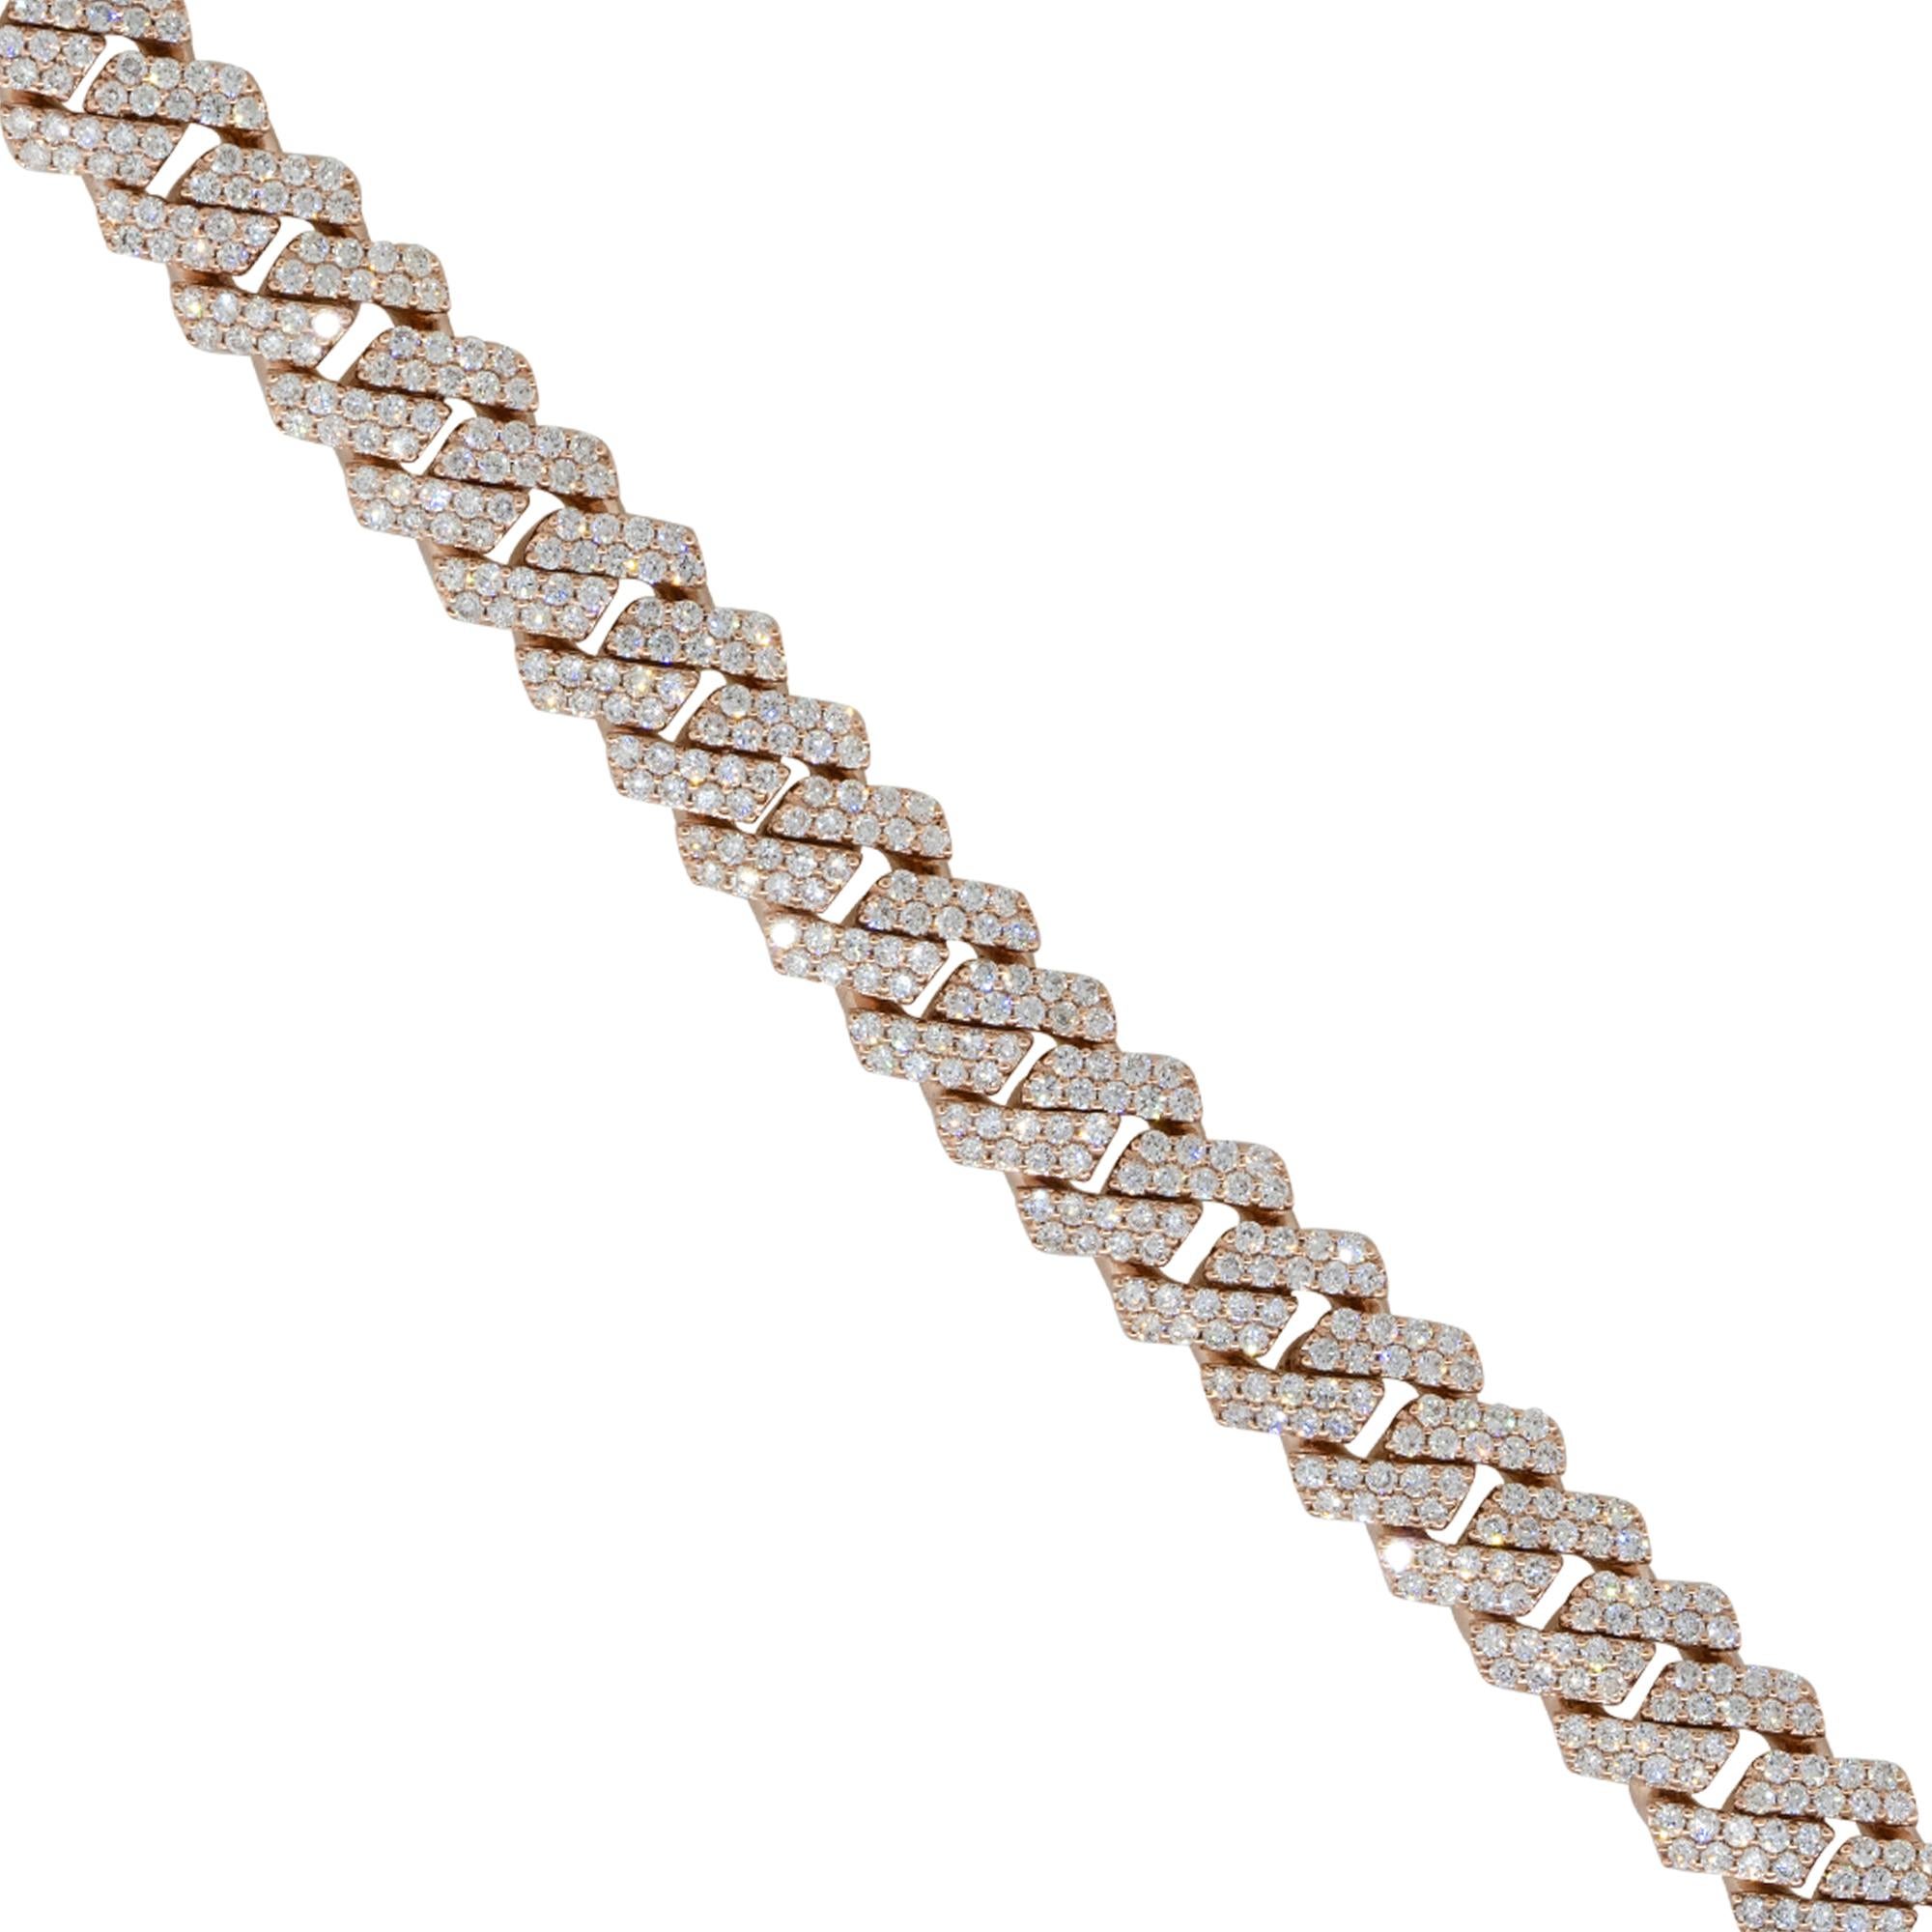 Material: 10k rose gold
Diamond Details: Approx. 7.57ctw of round cut Diamonds. Diamonds are G/H in color and VS in clarity.
Clasp: Tongue in box with double safety latch
Measurements: measures 7